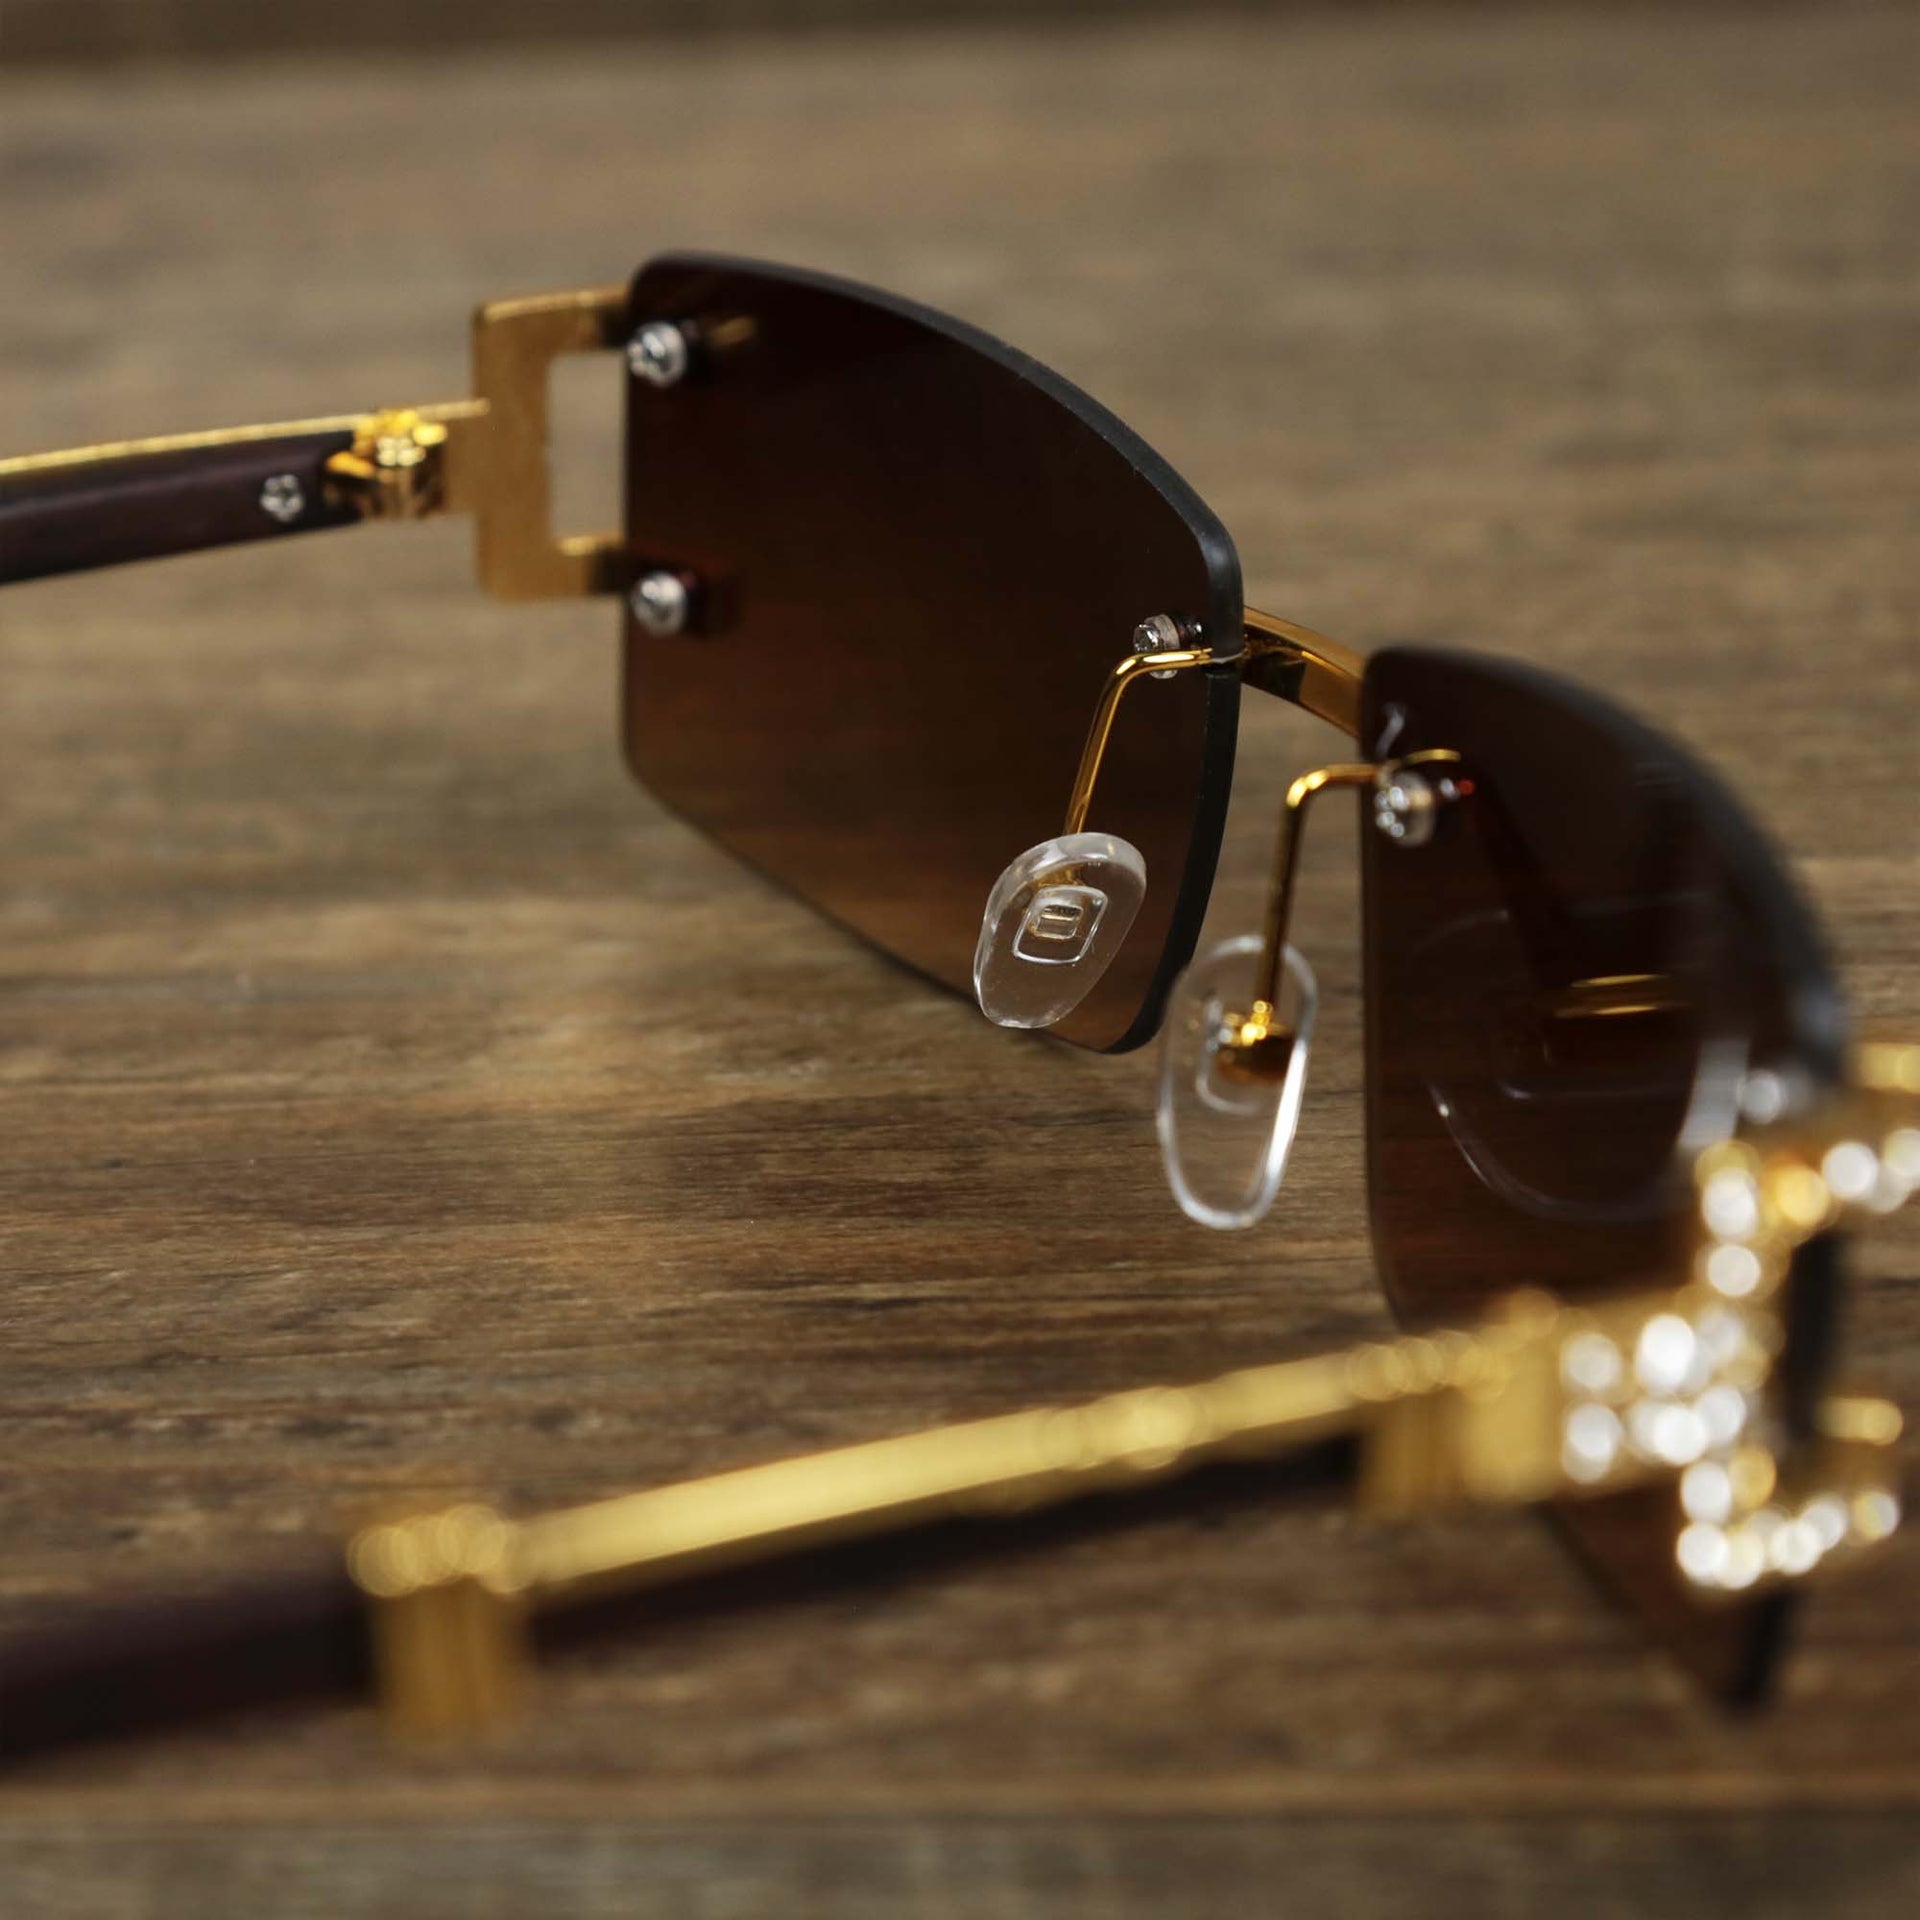 The inside of the Rectangle Frames Brown Gradient Lens Flooded Sunglasses with Gold Frame